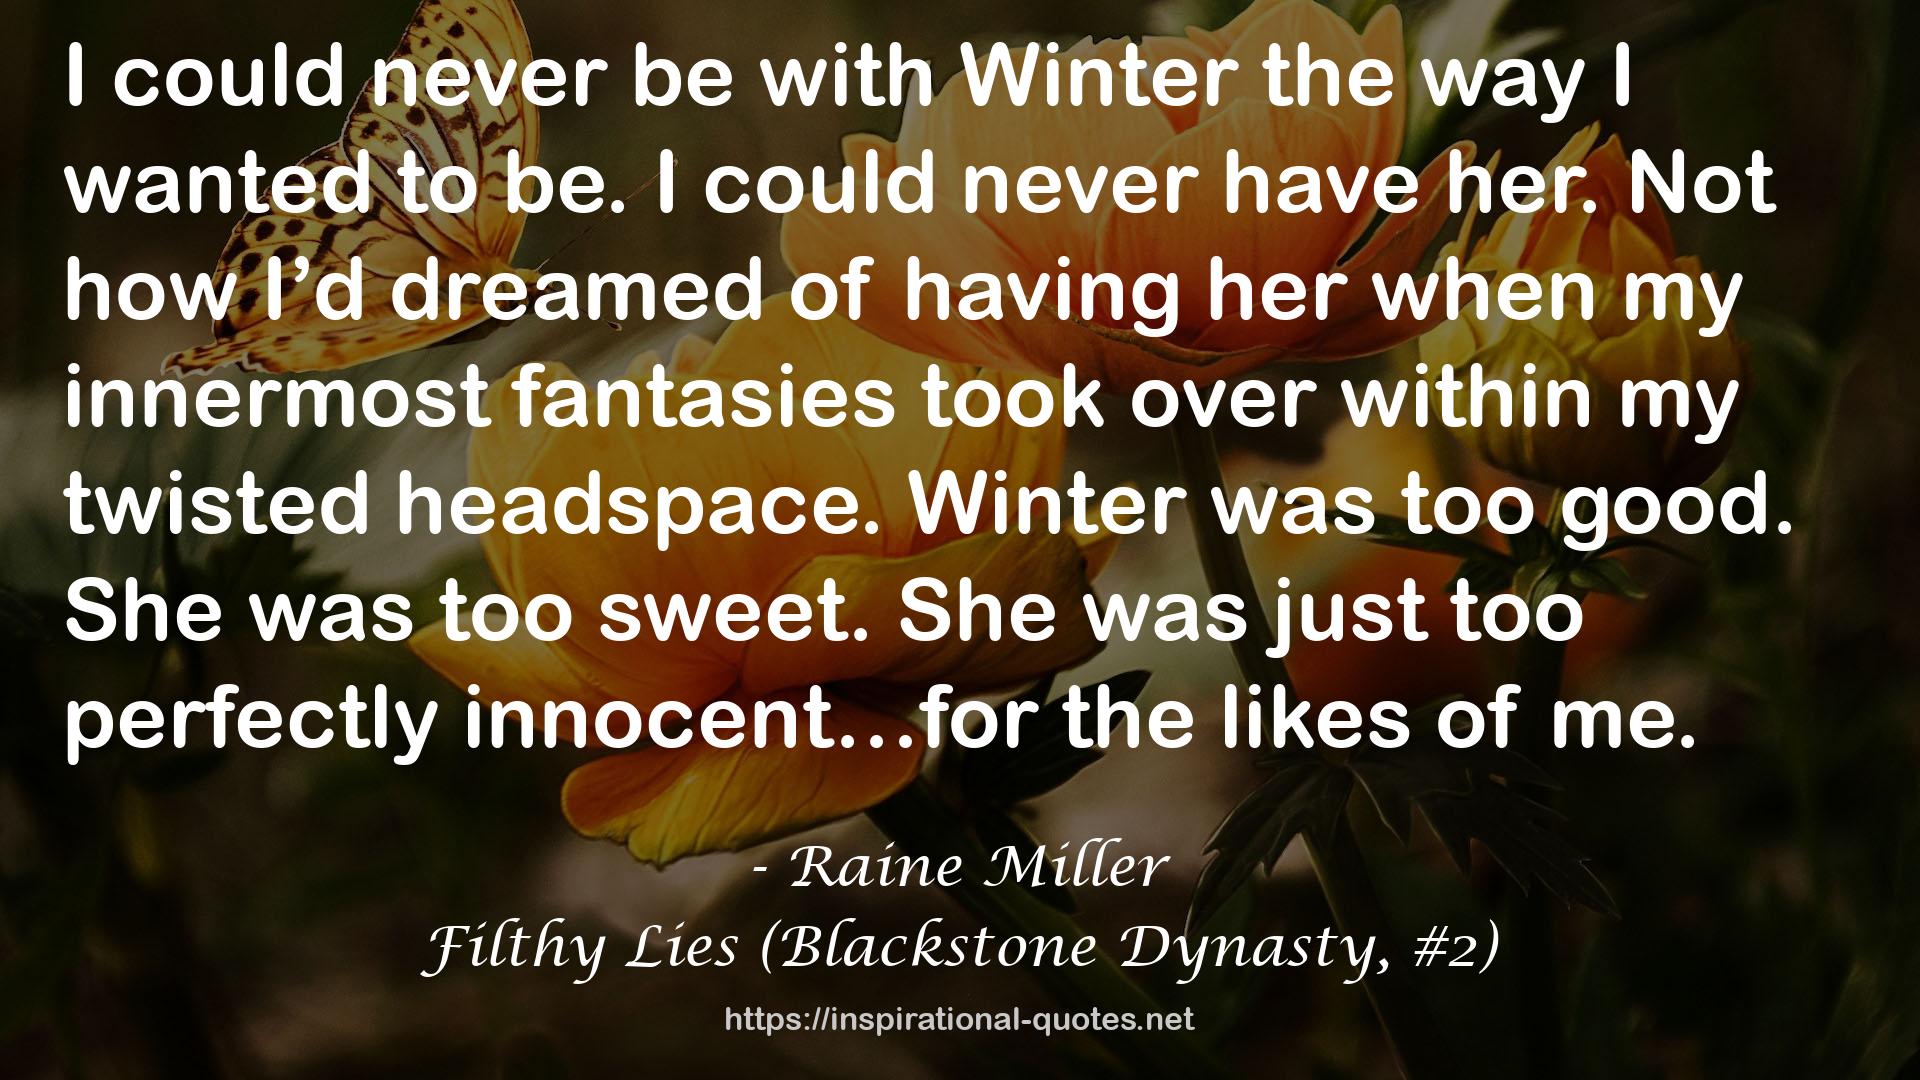 Filthy Lies (Blackstone Dynasty, #2) QUOTES